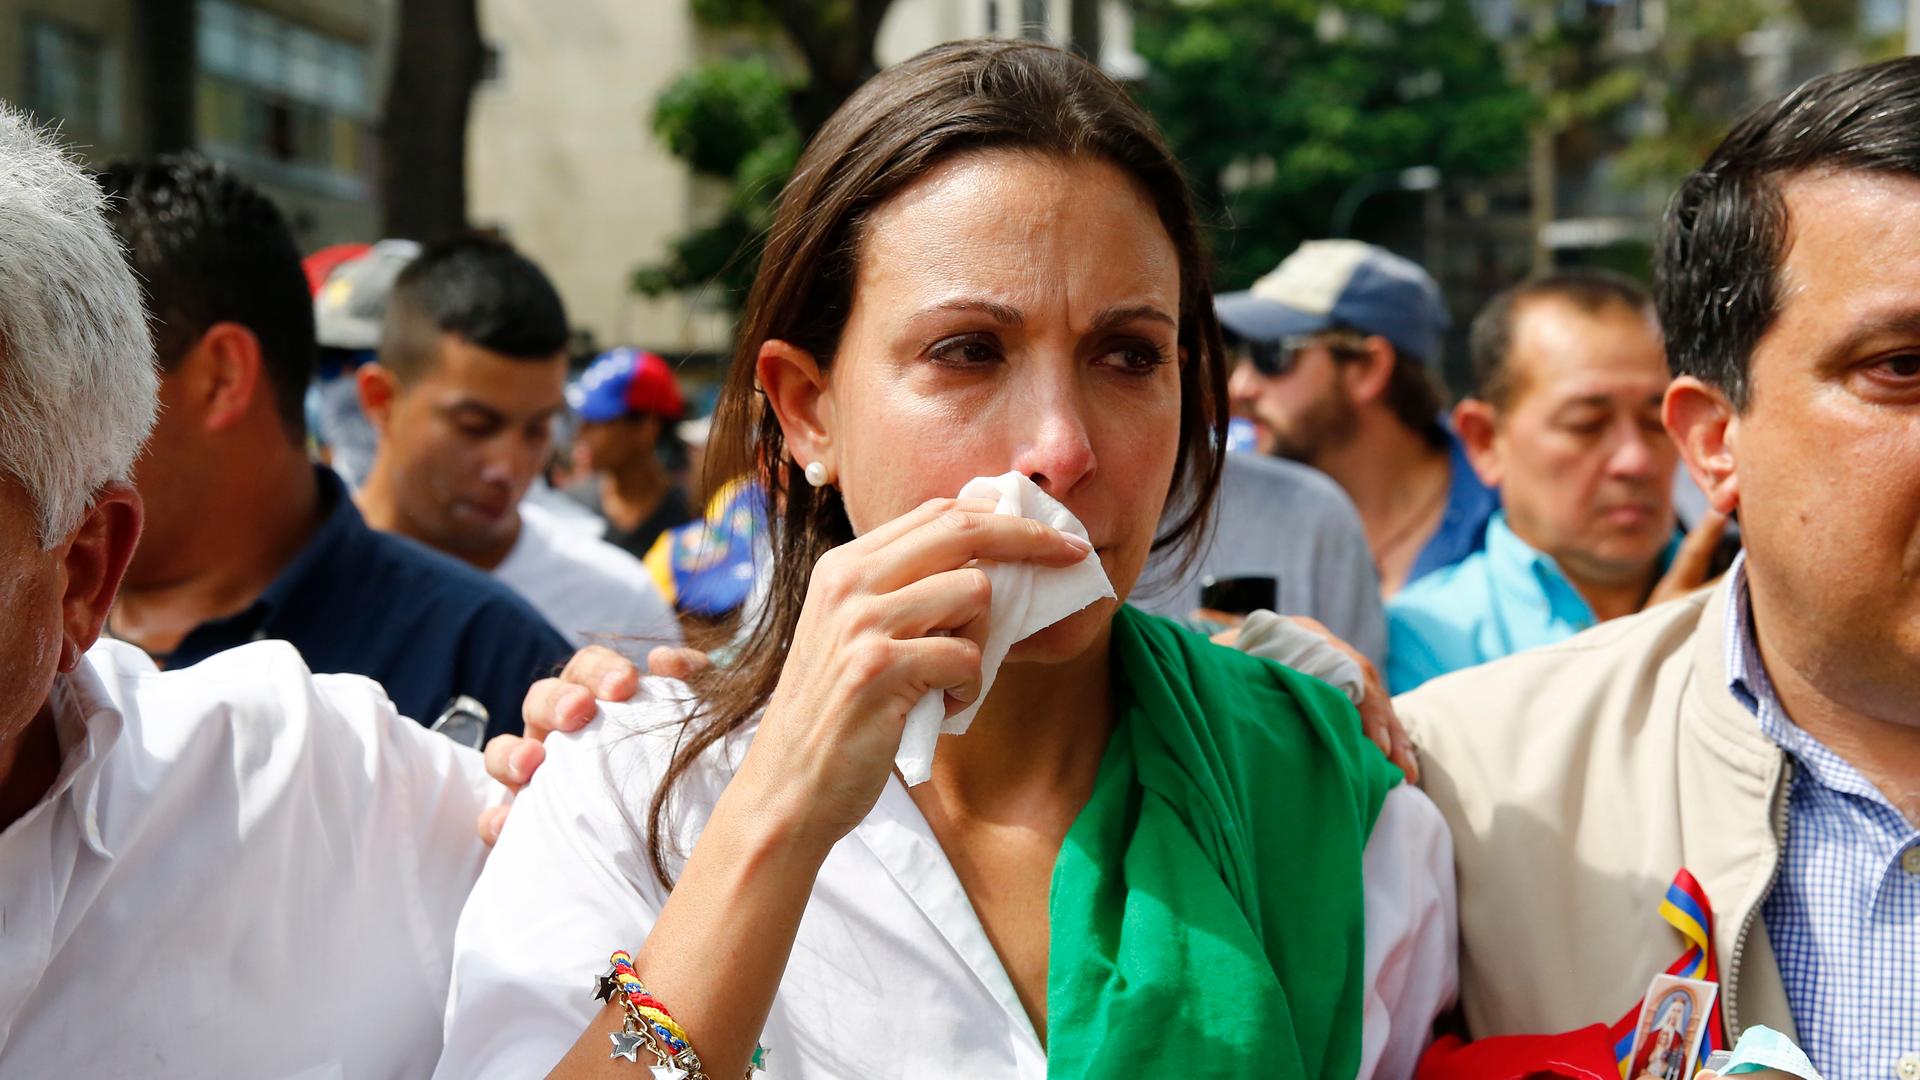 Venezuelan opposition leader Maria Corina Machado reacts after inhaling tear gas after she tried to take a seat at the national assembly in Caracas April 1, 2014.